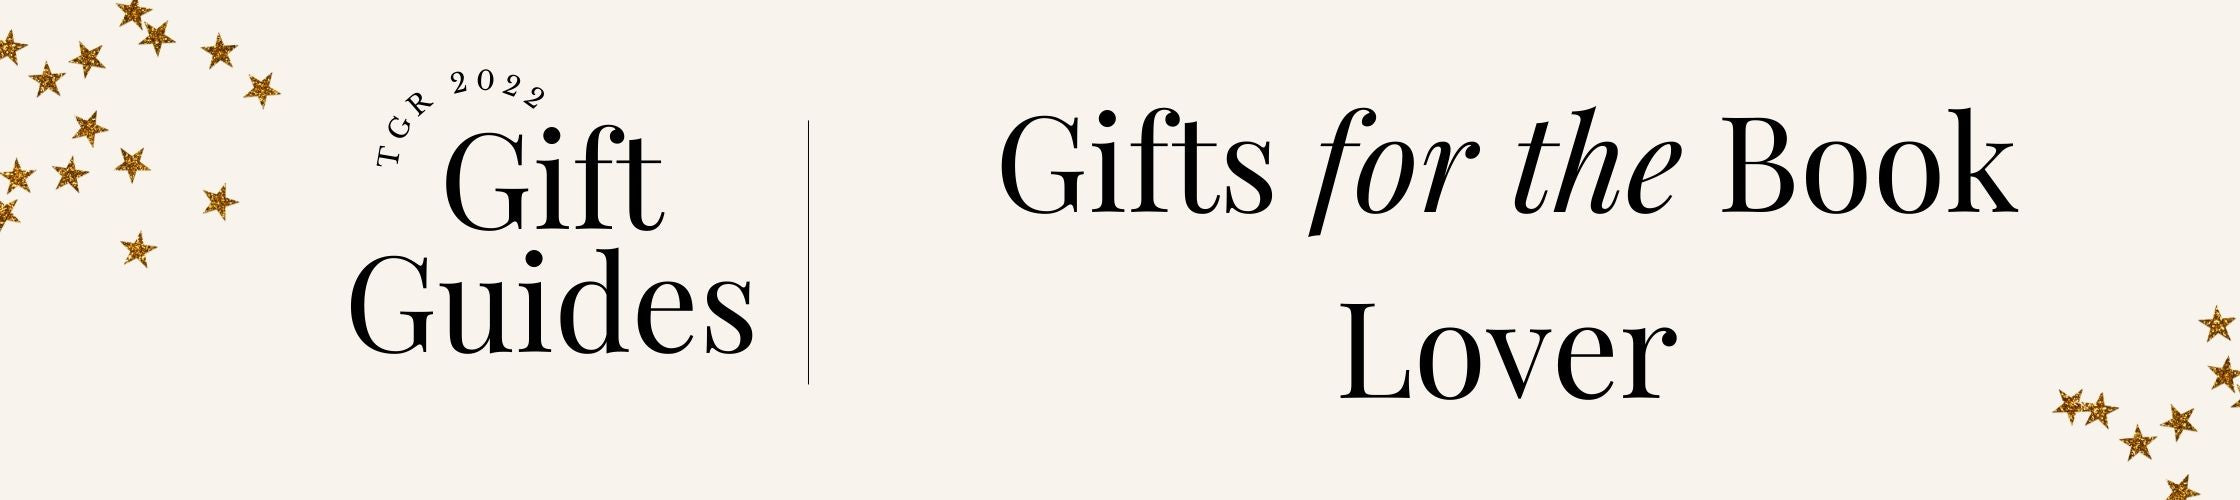 2022 Holiday Gift Guide: Gifts for the Book Lover